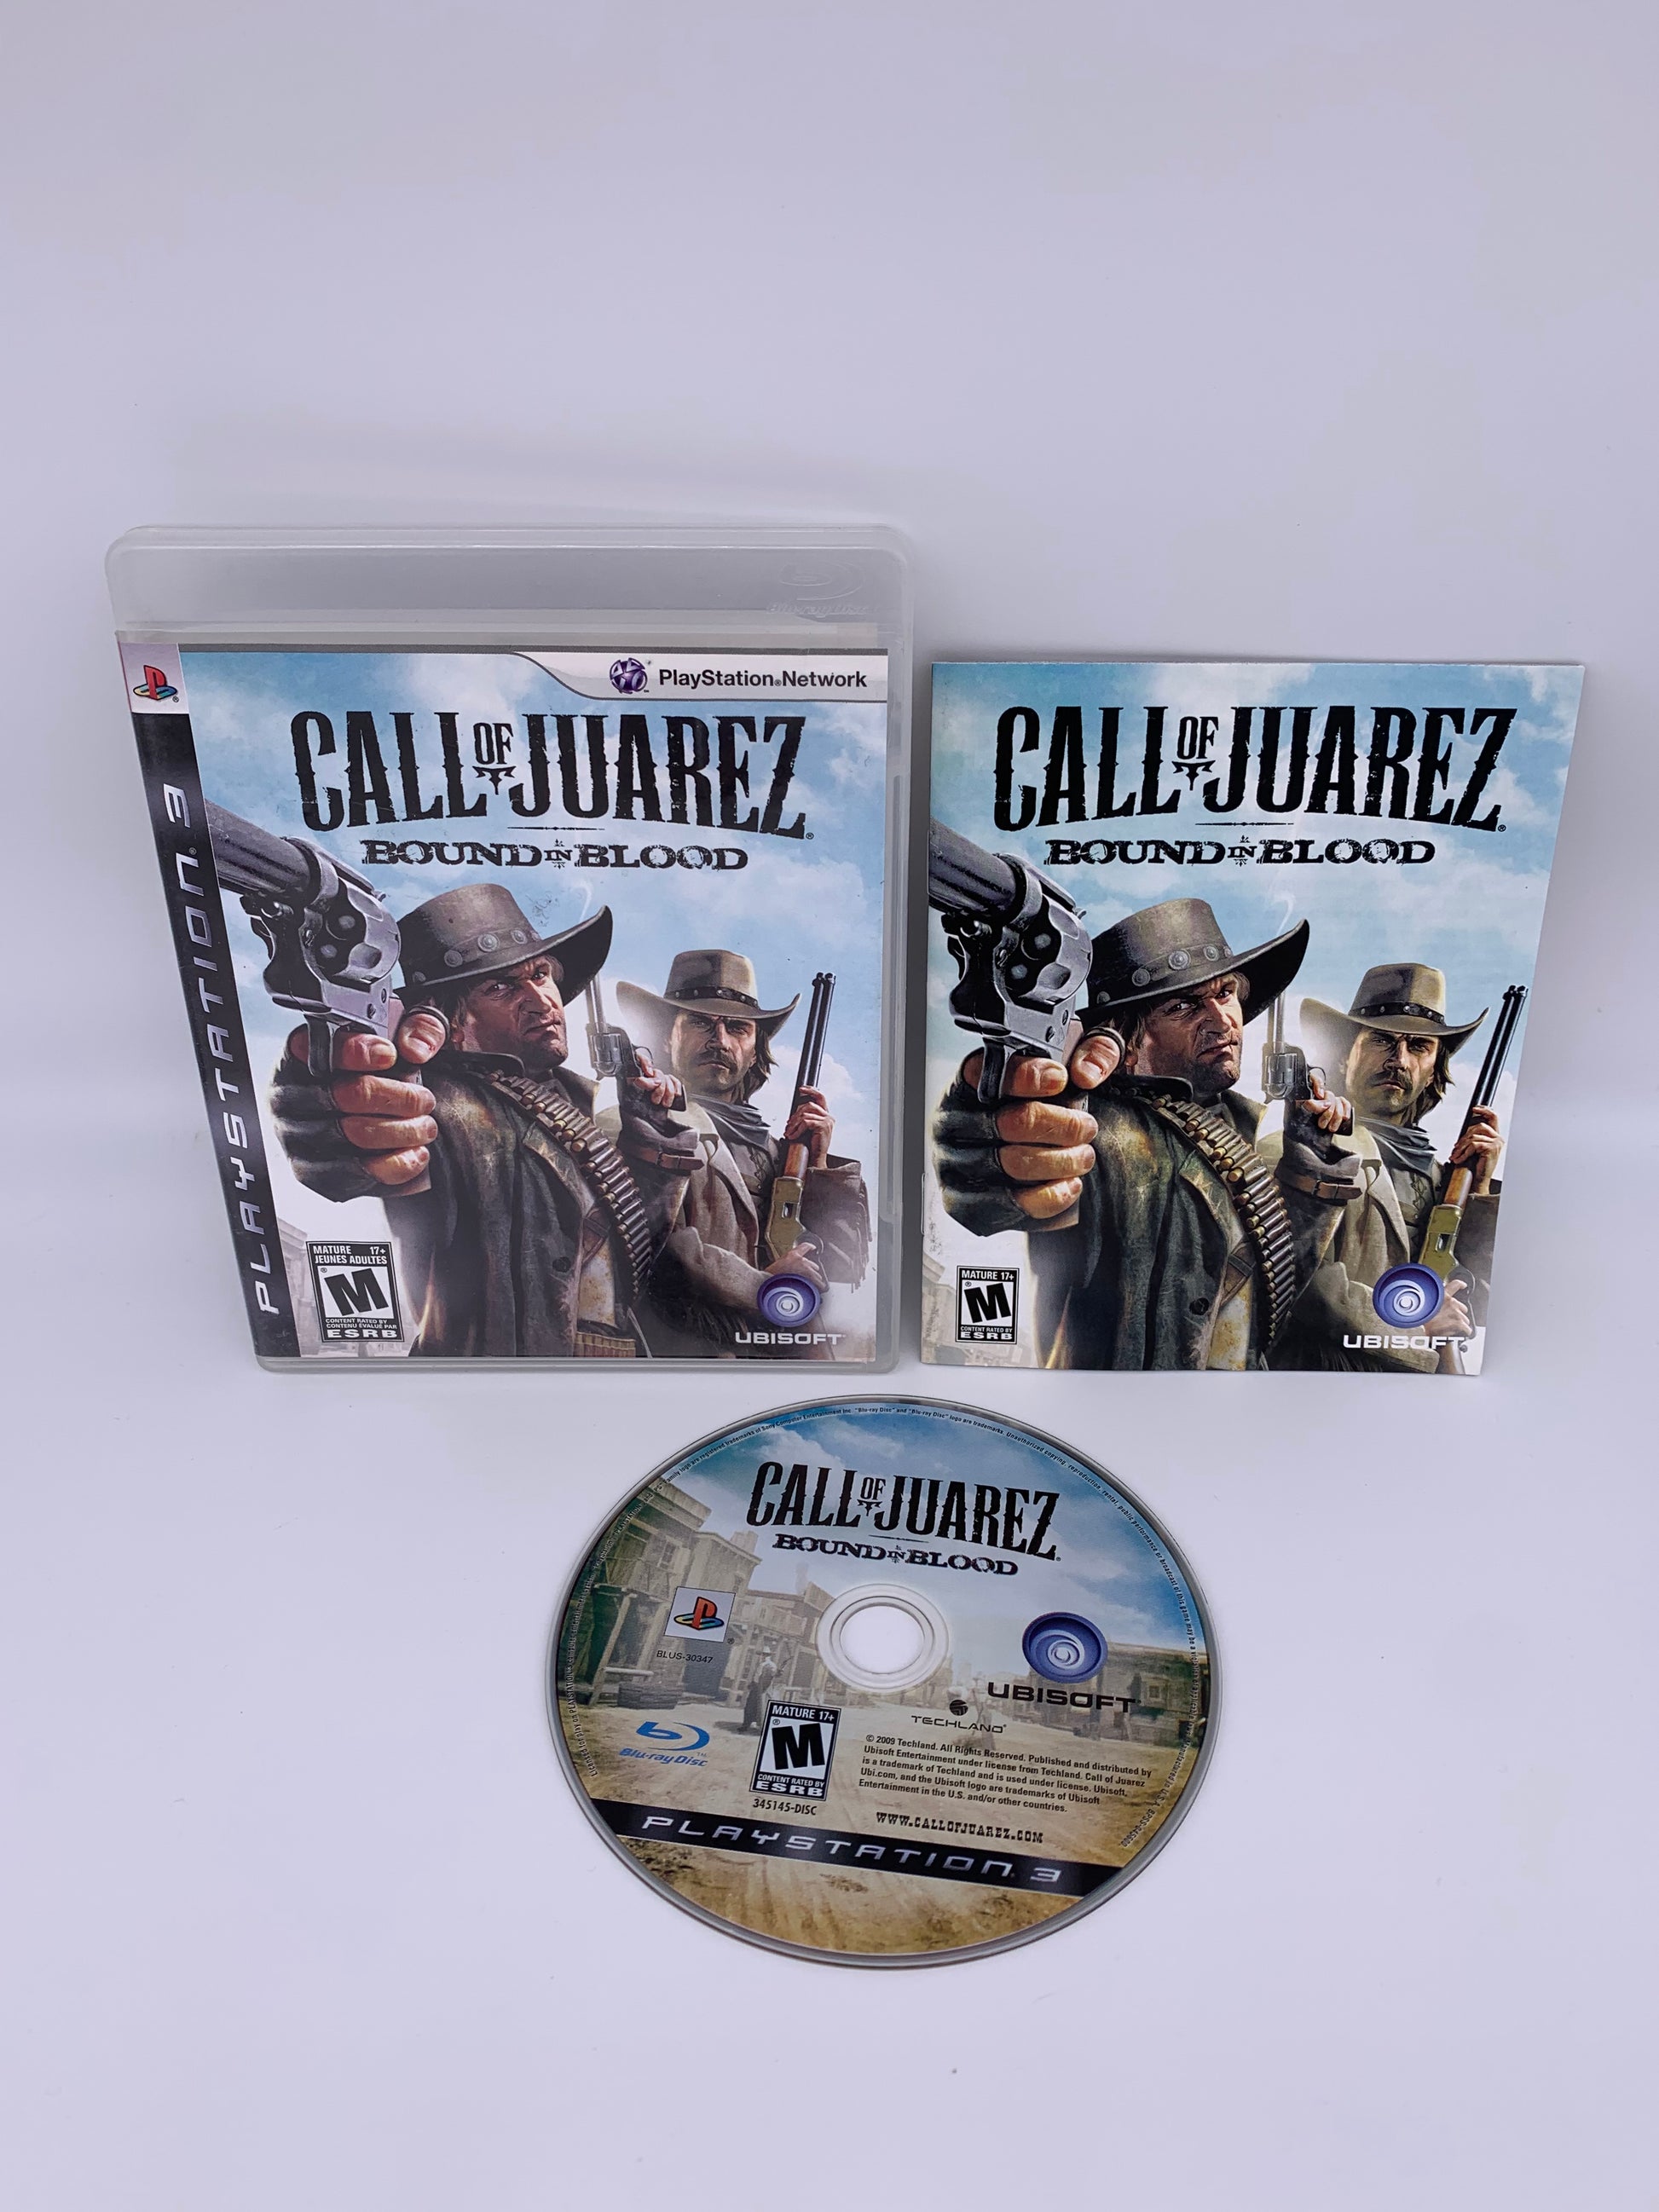 PiXEL-RETRO.COM : SONY PLAYSTATION 3 (PS3) COMPLET CIB BOX MANUAL GAME NTSC CALL OF JUAREZ BOUND IN BLOOD